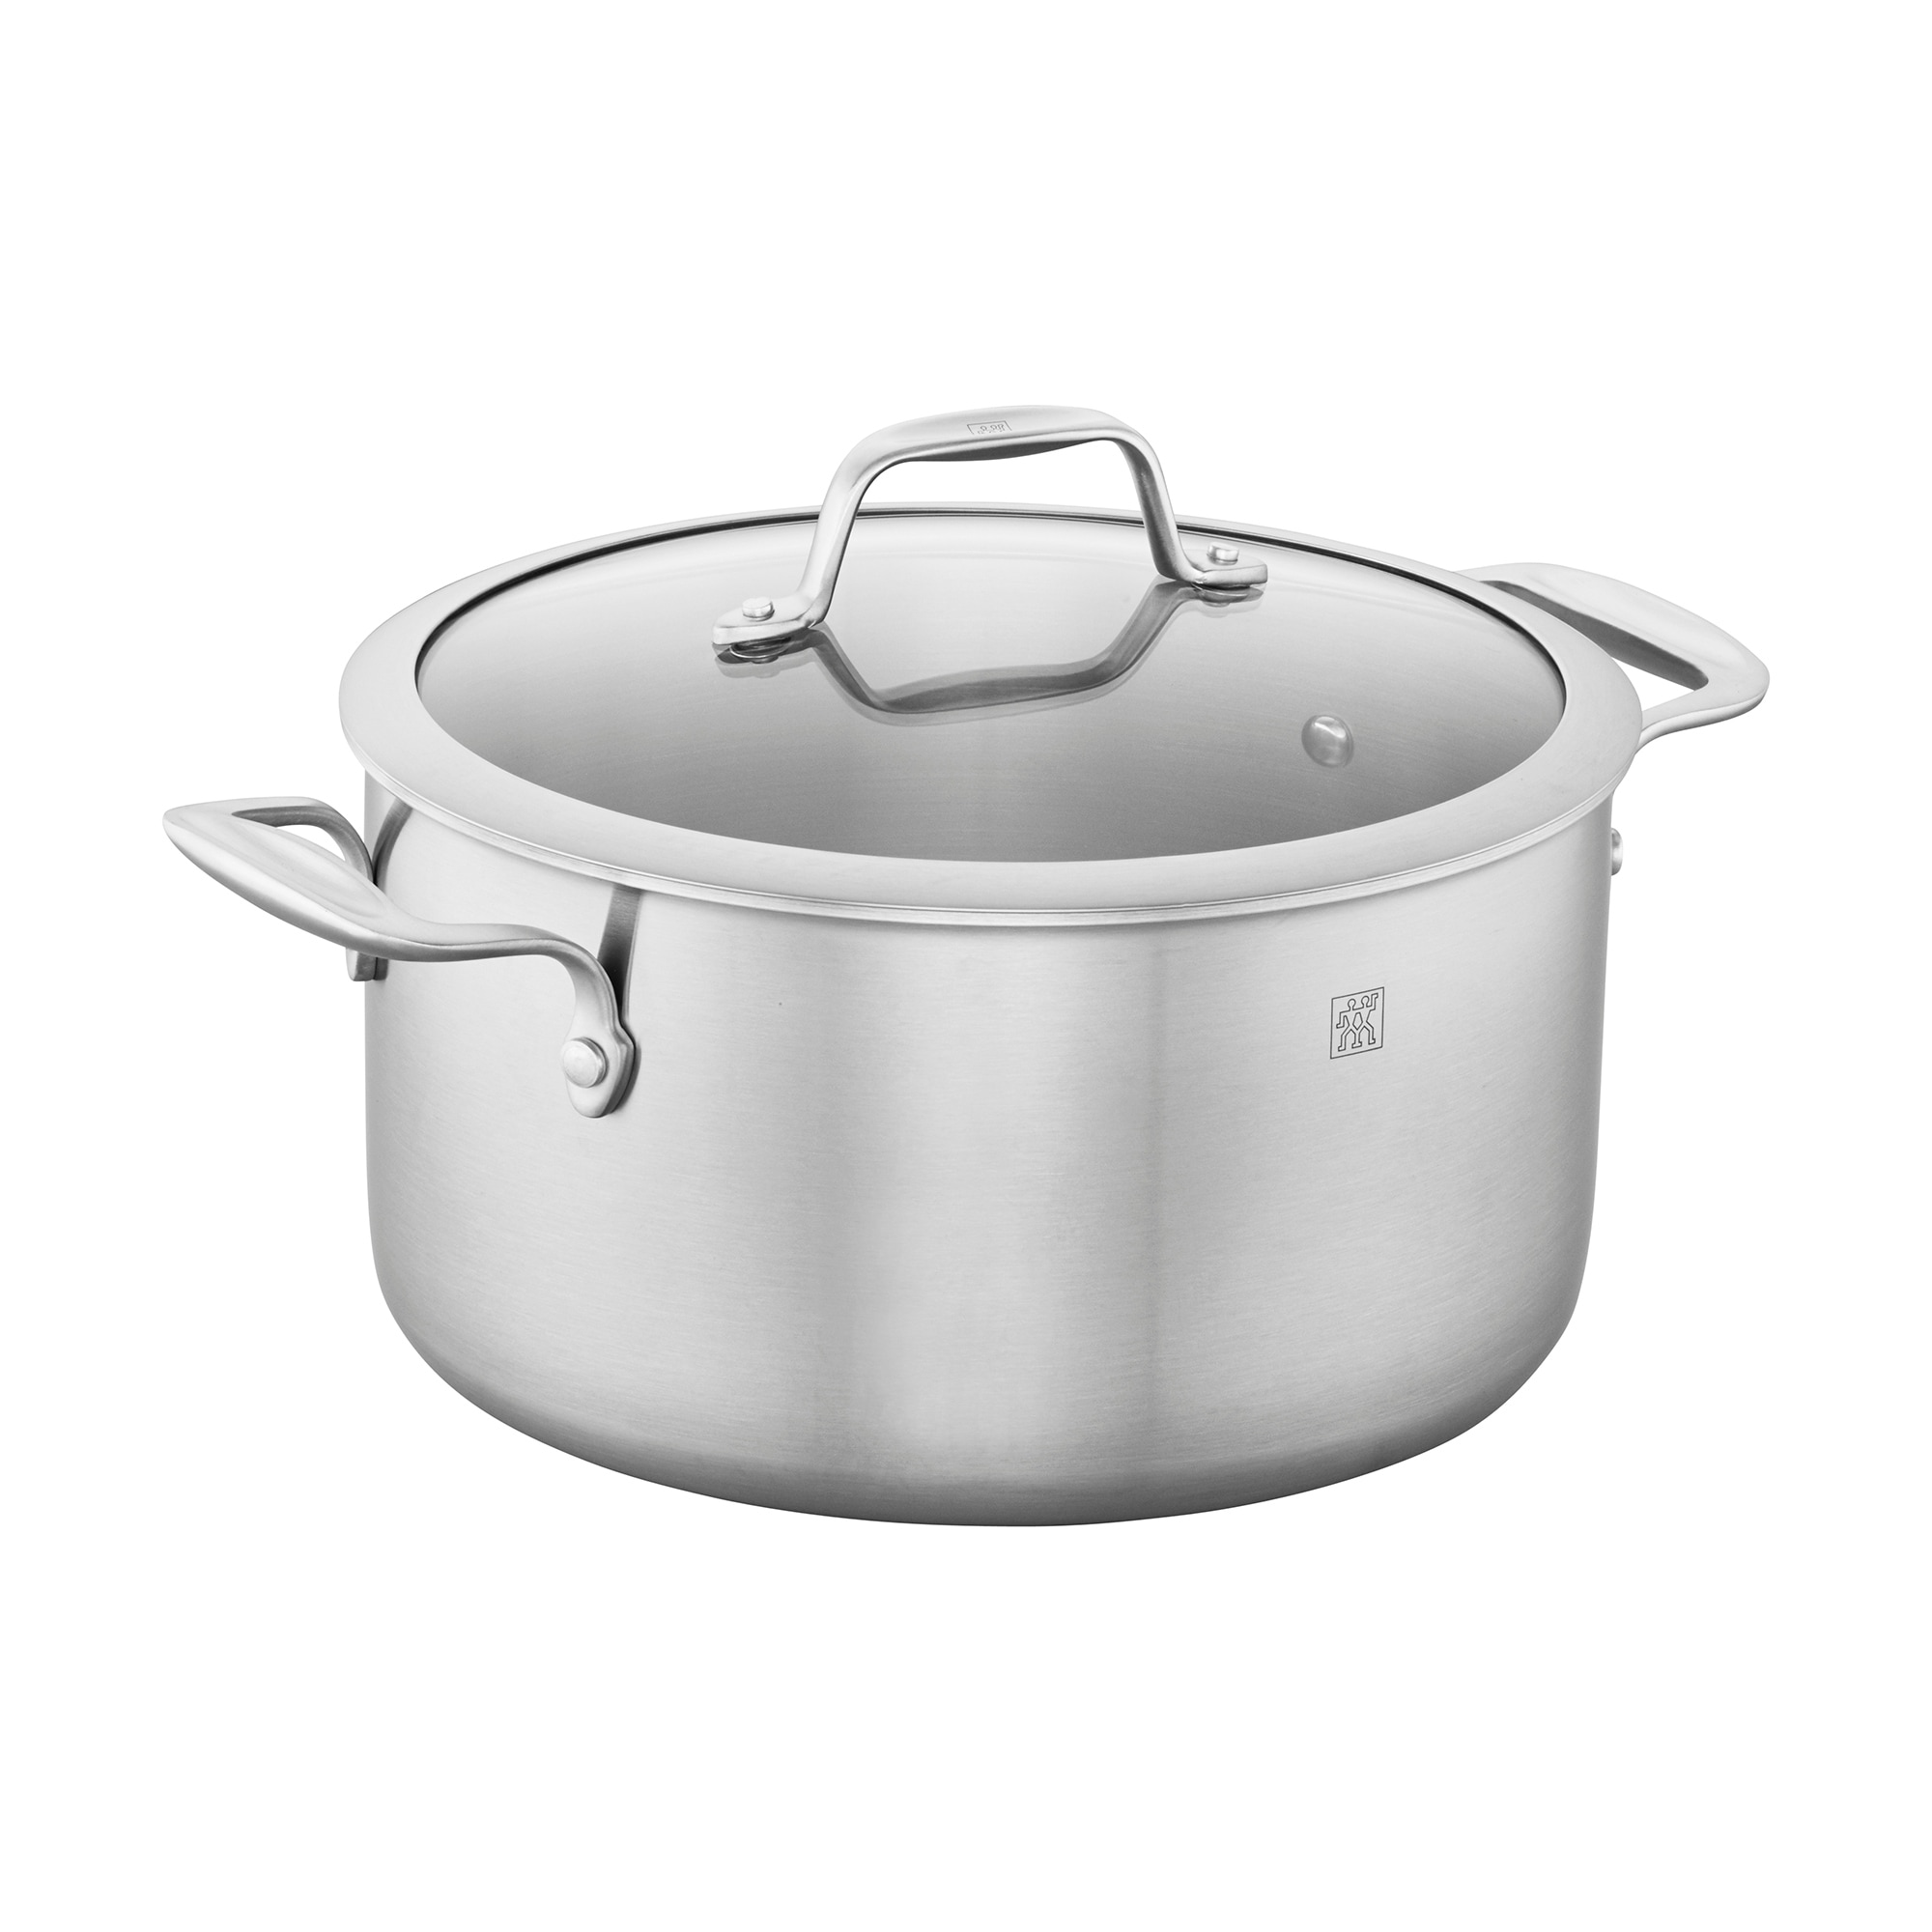 https://ak1.ostkcdn.com/images/products/is/images/direct/e4e57e8dc7544934dd33e379ba0f91aaa5a58f4c/ZWILLING-Spirit-3-ply-6-qt-Stainless-Steel-Dutch-Oven.jpg